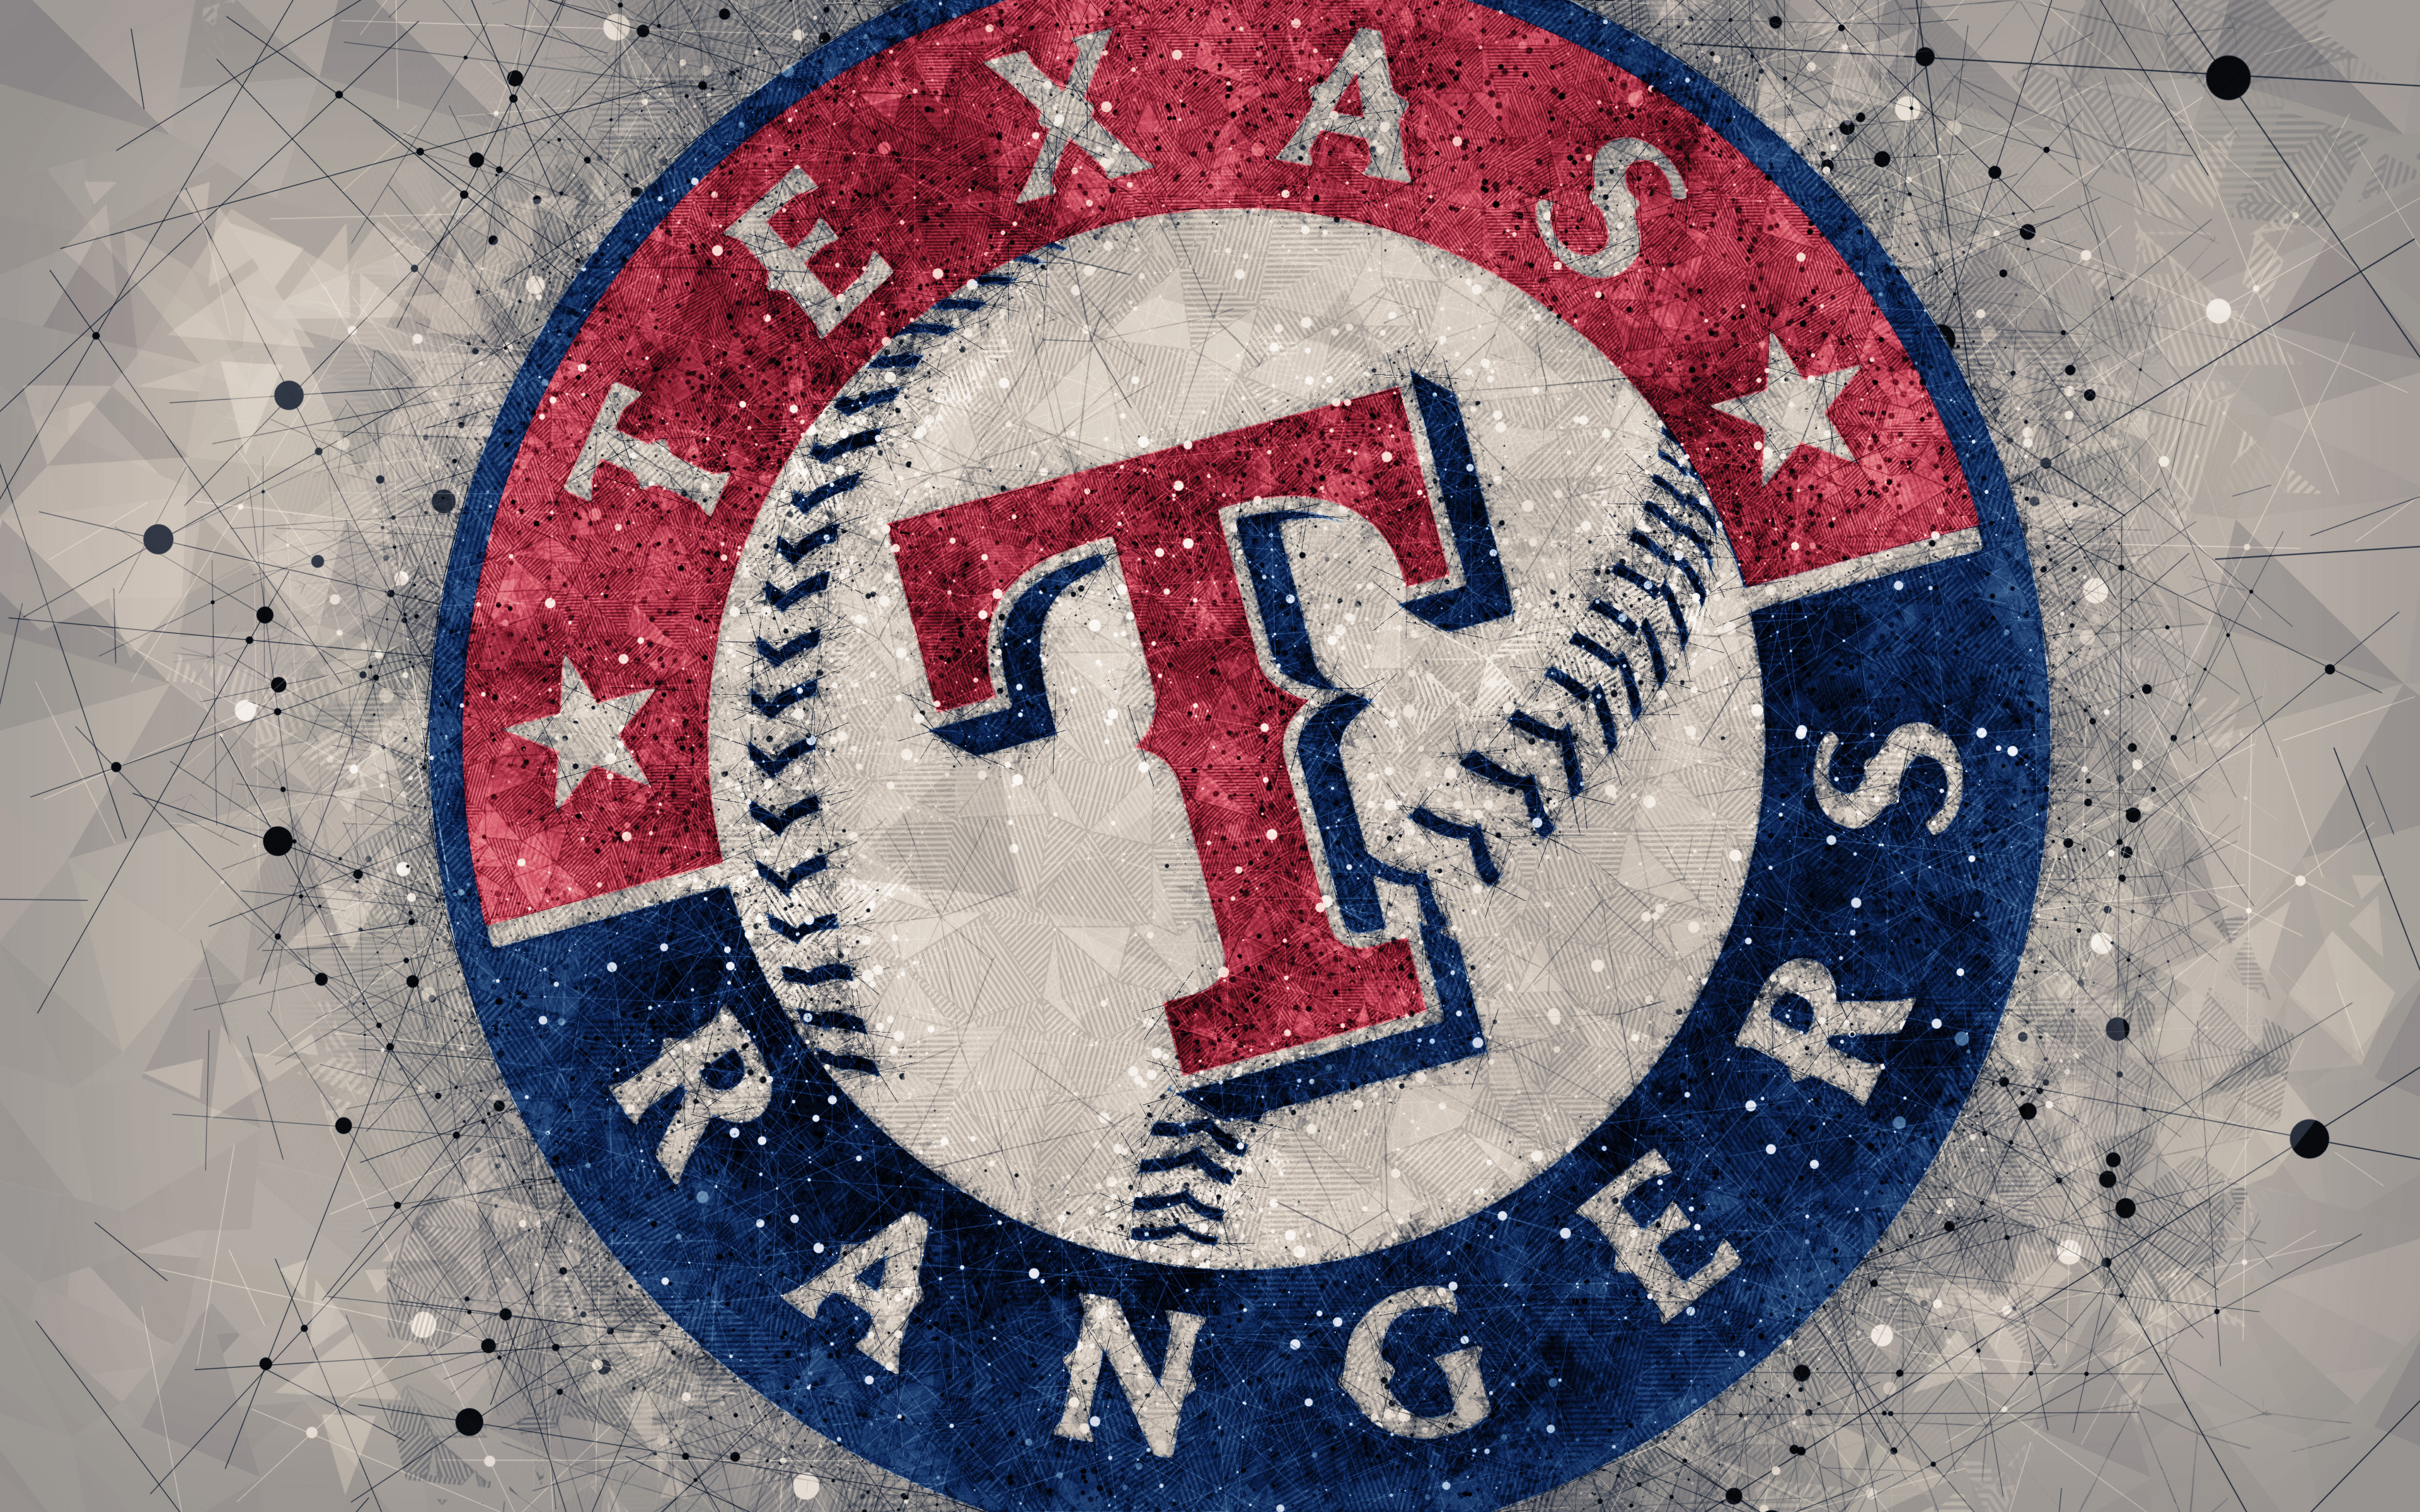 Texas Rangers - We've got some new wallpapers for you. ✨